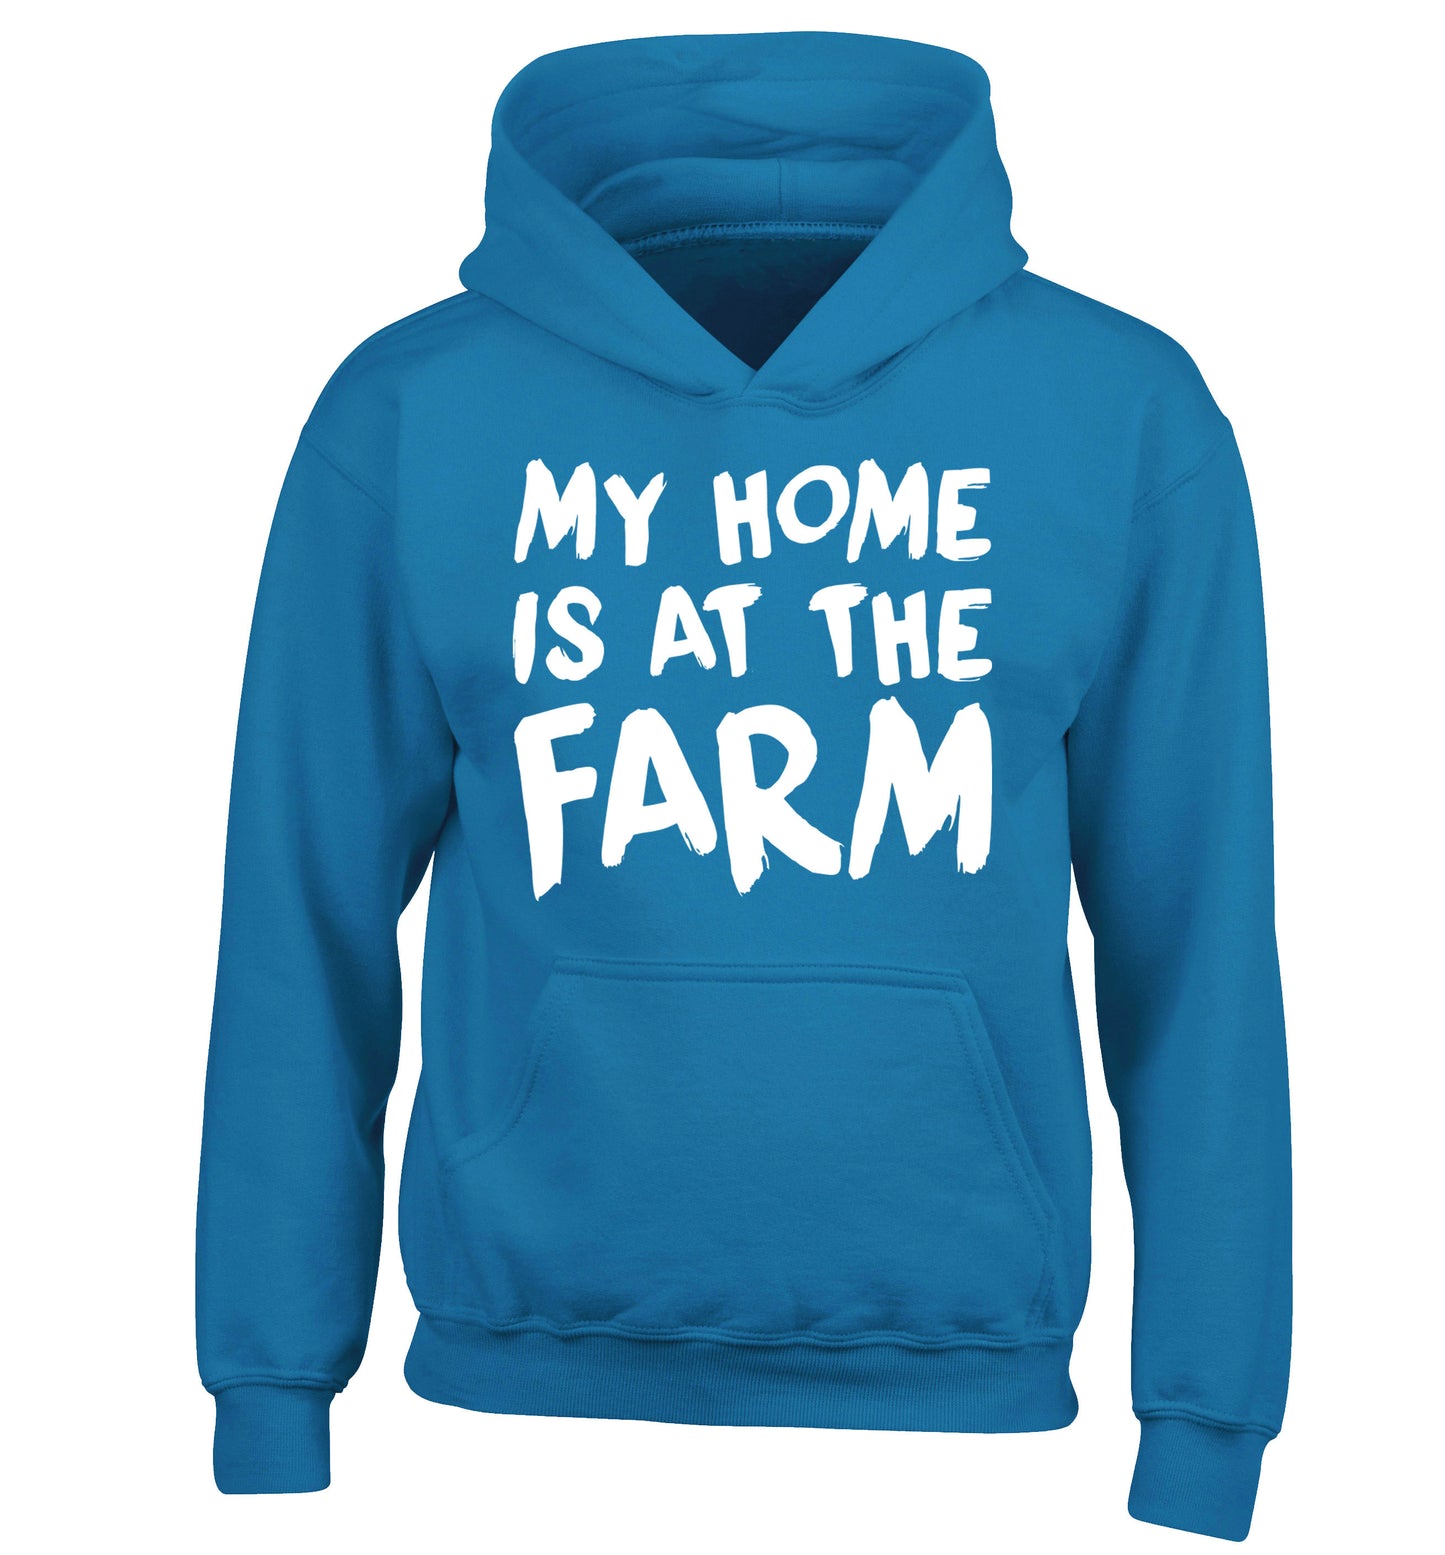 My home is at the farm children's blue hoodie 12-14 Years